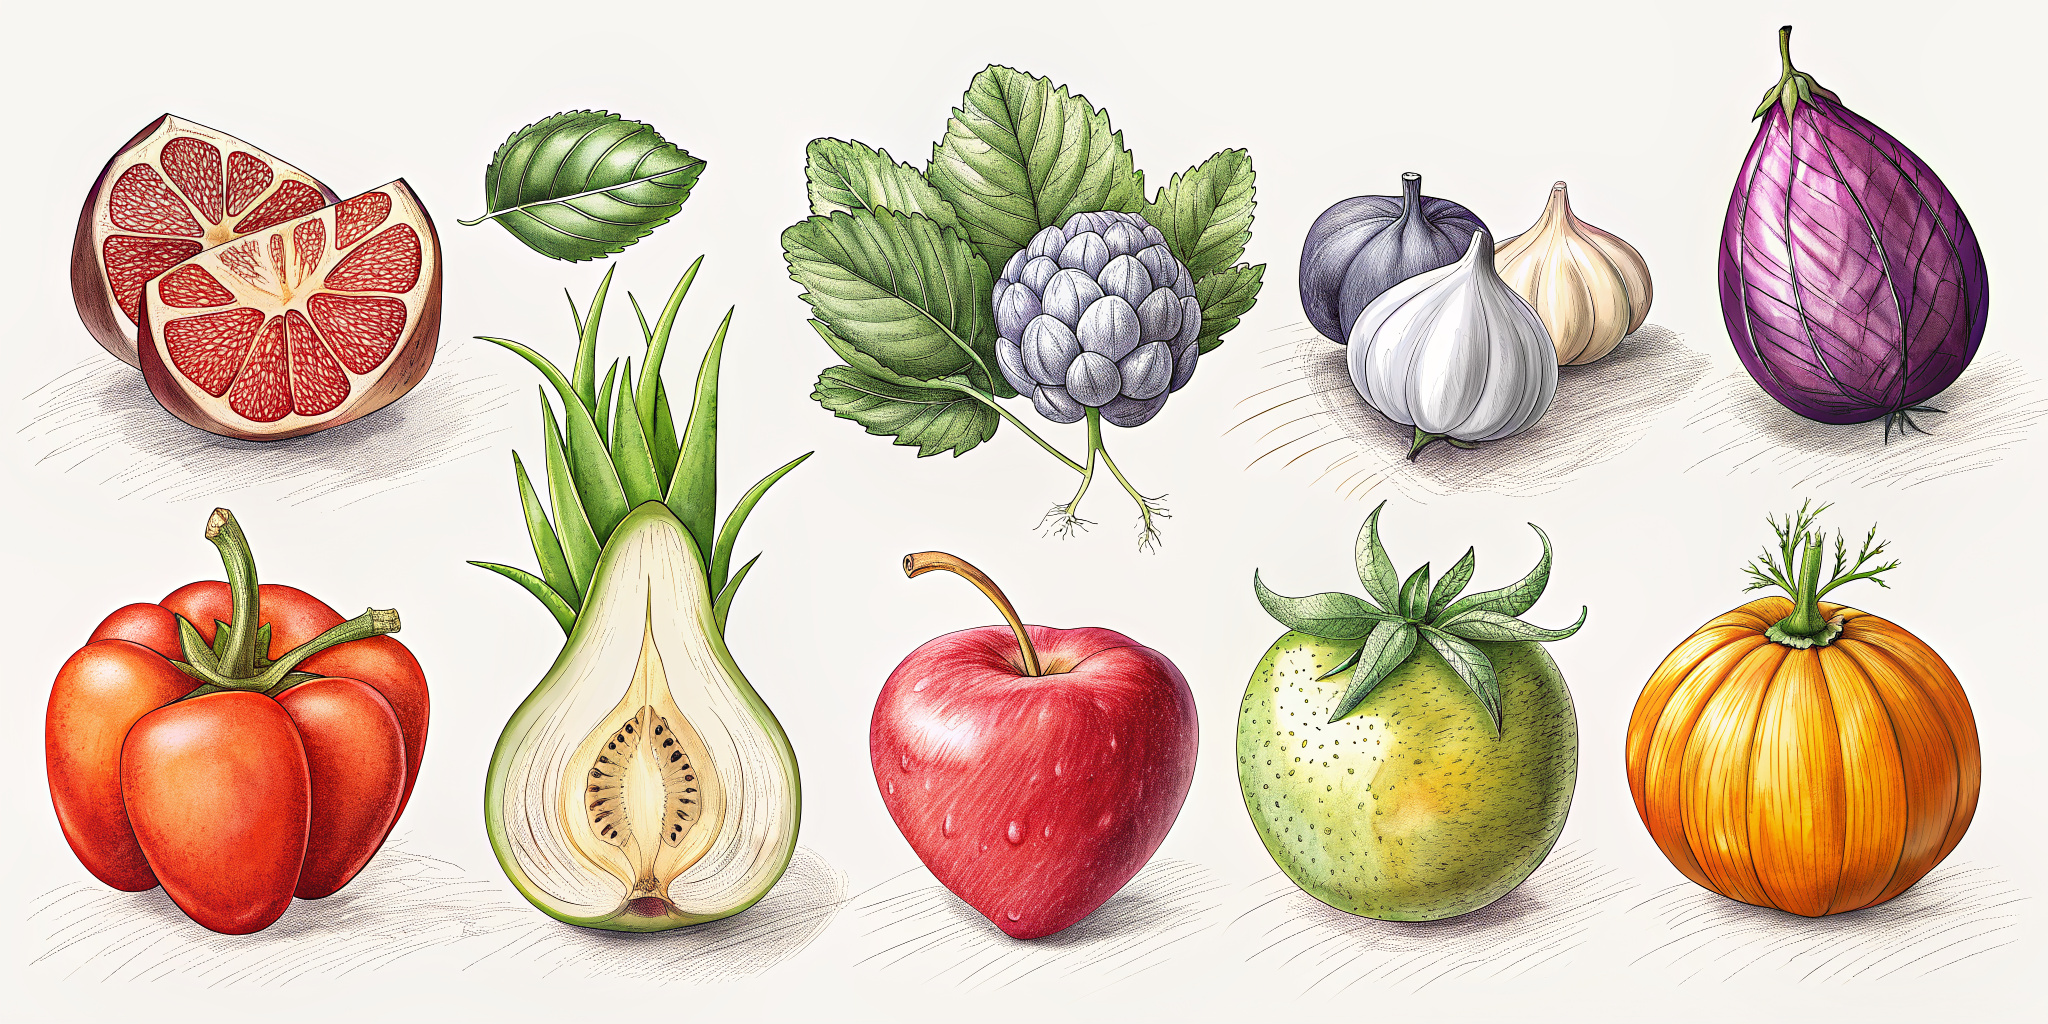 
Please refer to this design style and help me change it to other fruits and vegetables, with single colors and sketching.